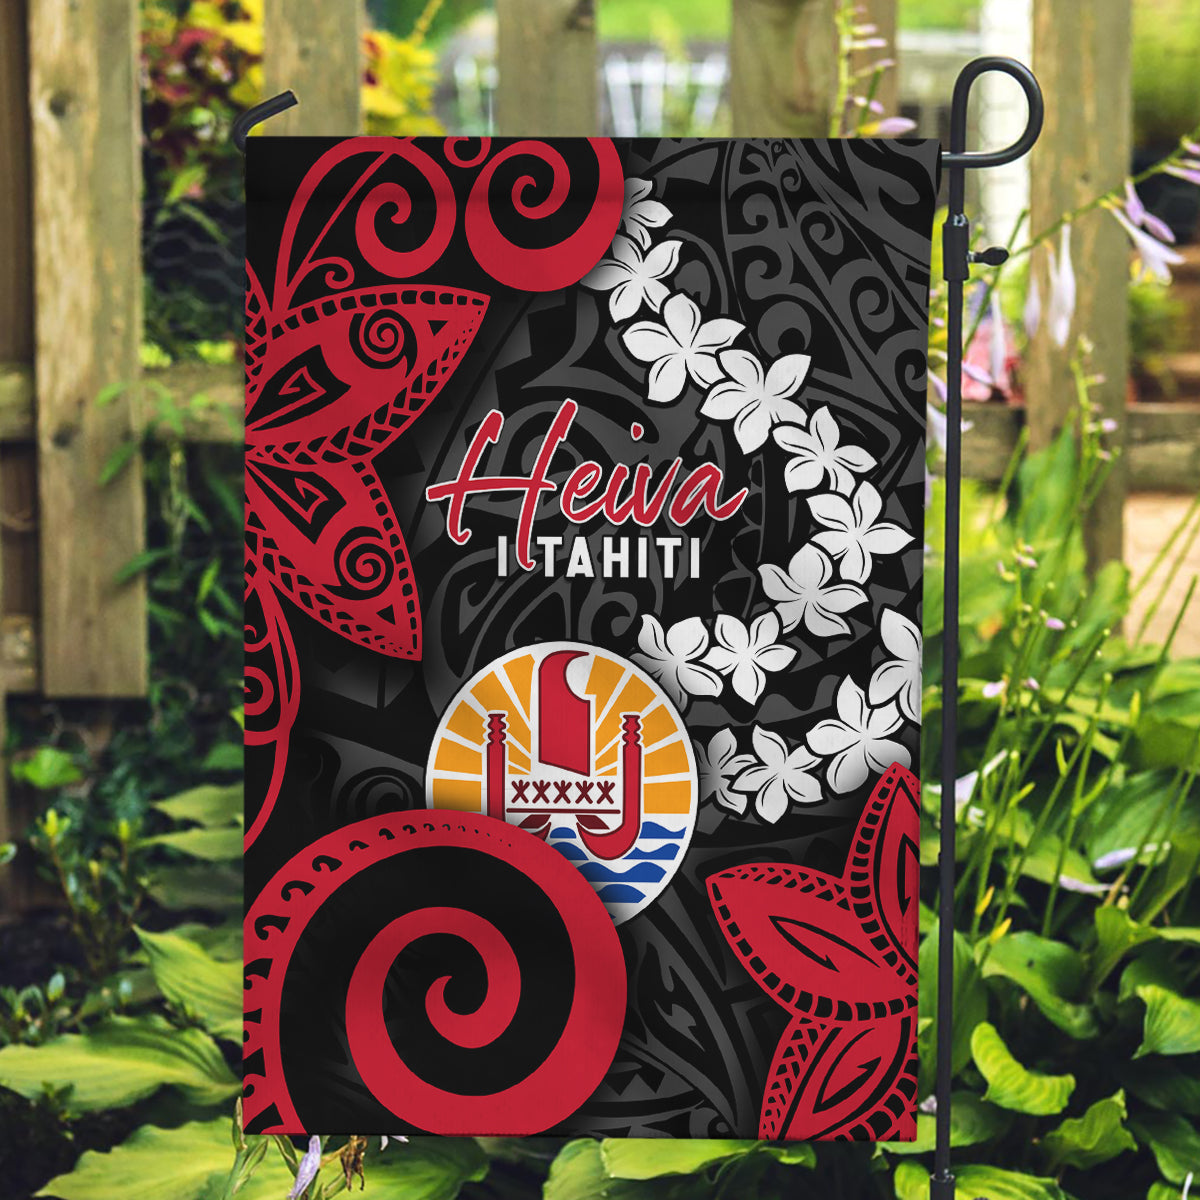 Tahiti Heiva Festival Garden Flag Floral Pattern With Coat Of Arms